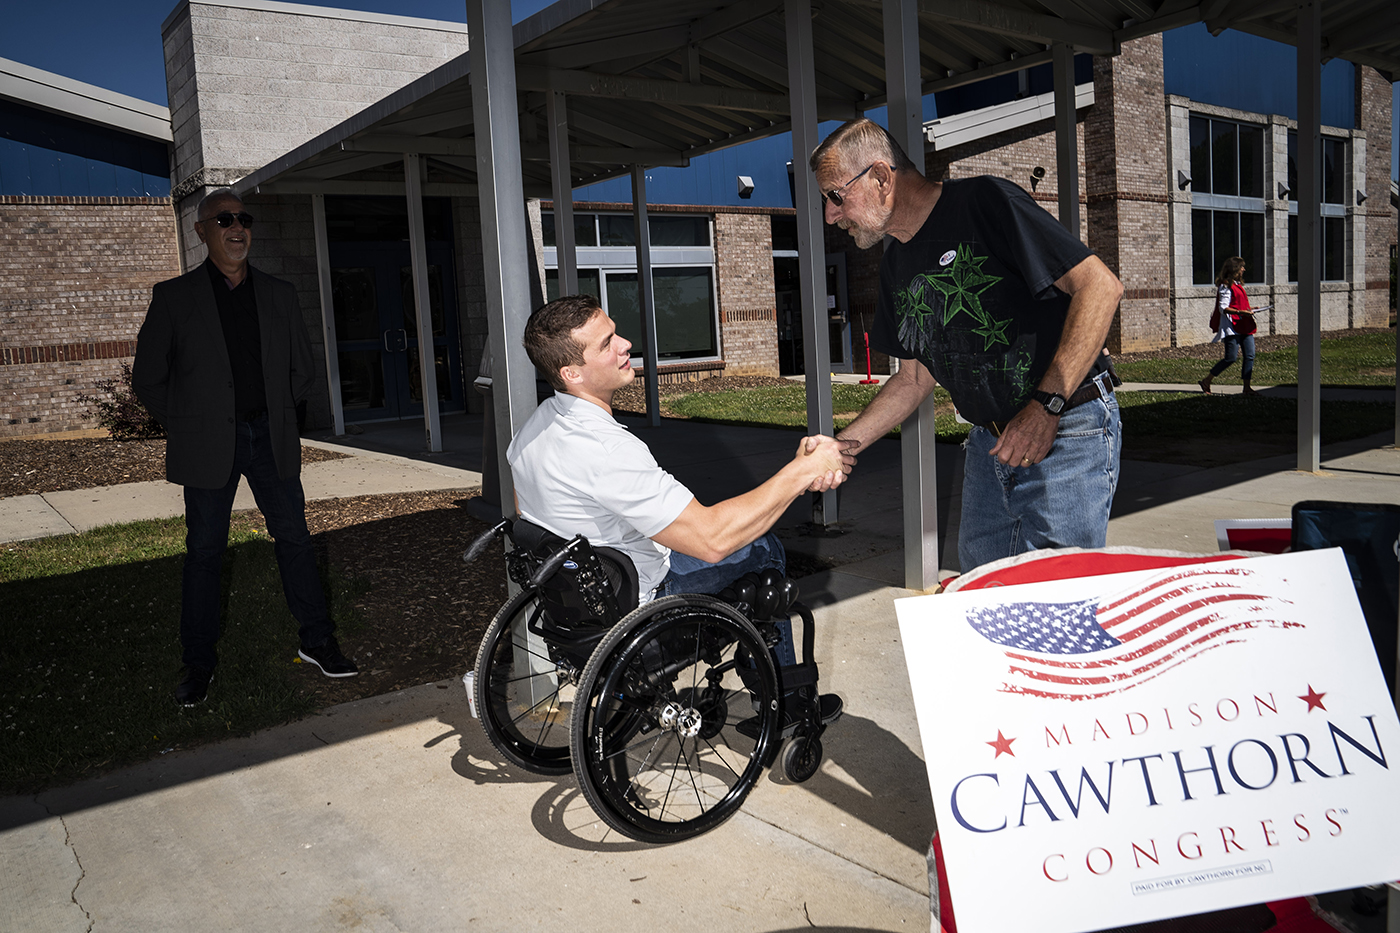 A handshake in front of a political sign